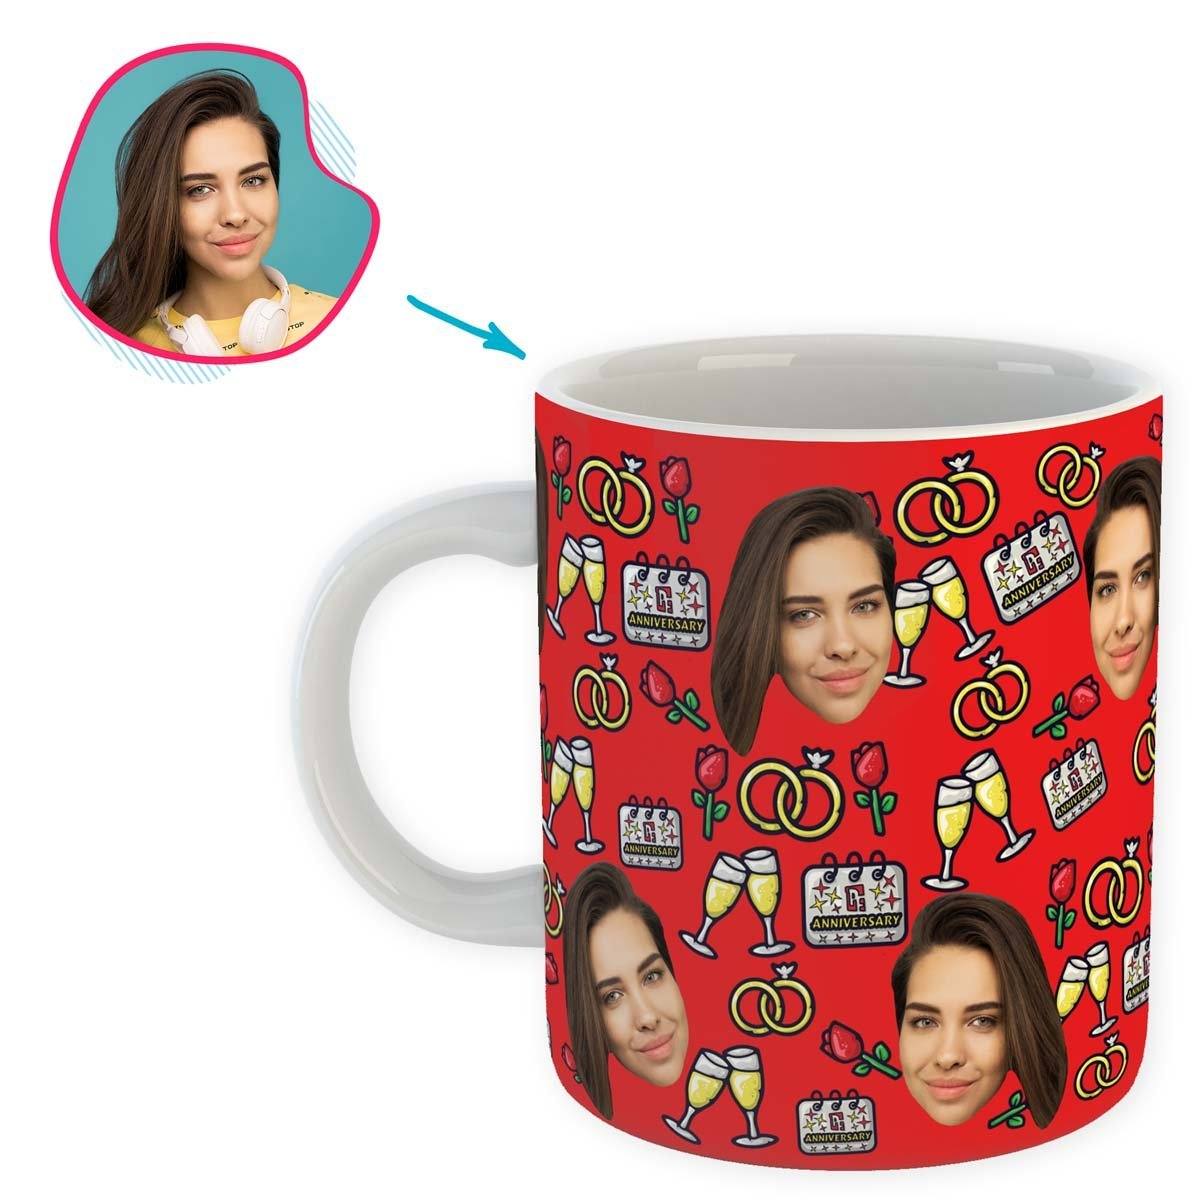 Red Anniversary personalized mug with photo of face printed on it